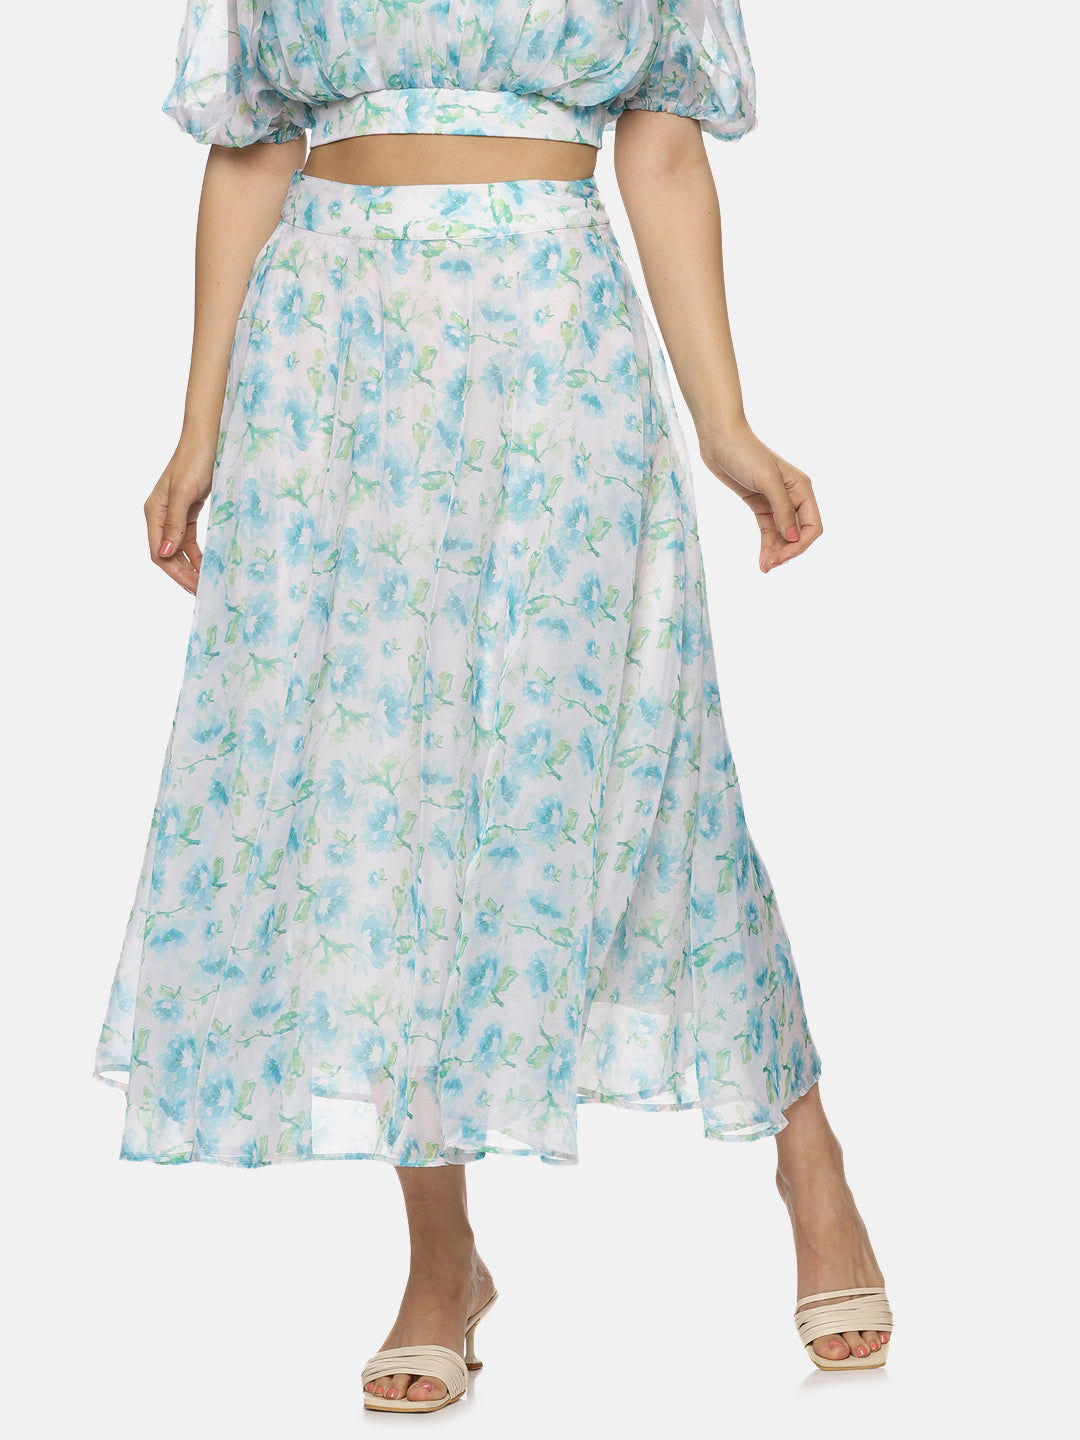 IS.U Floral White Flared Midaxi Skirt